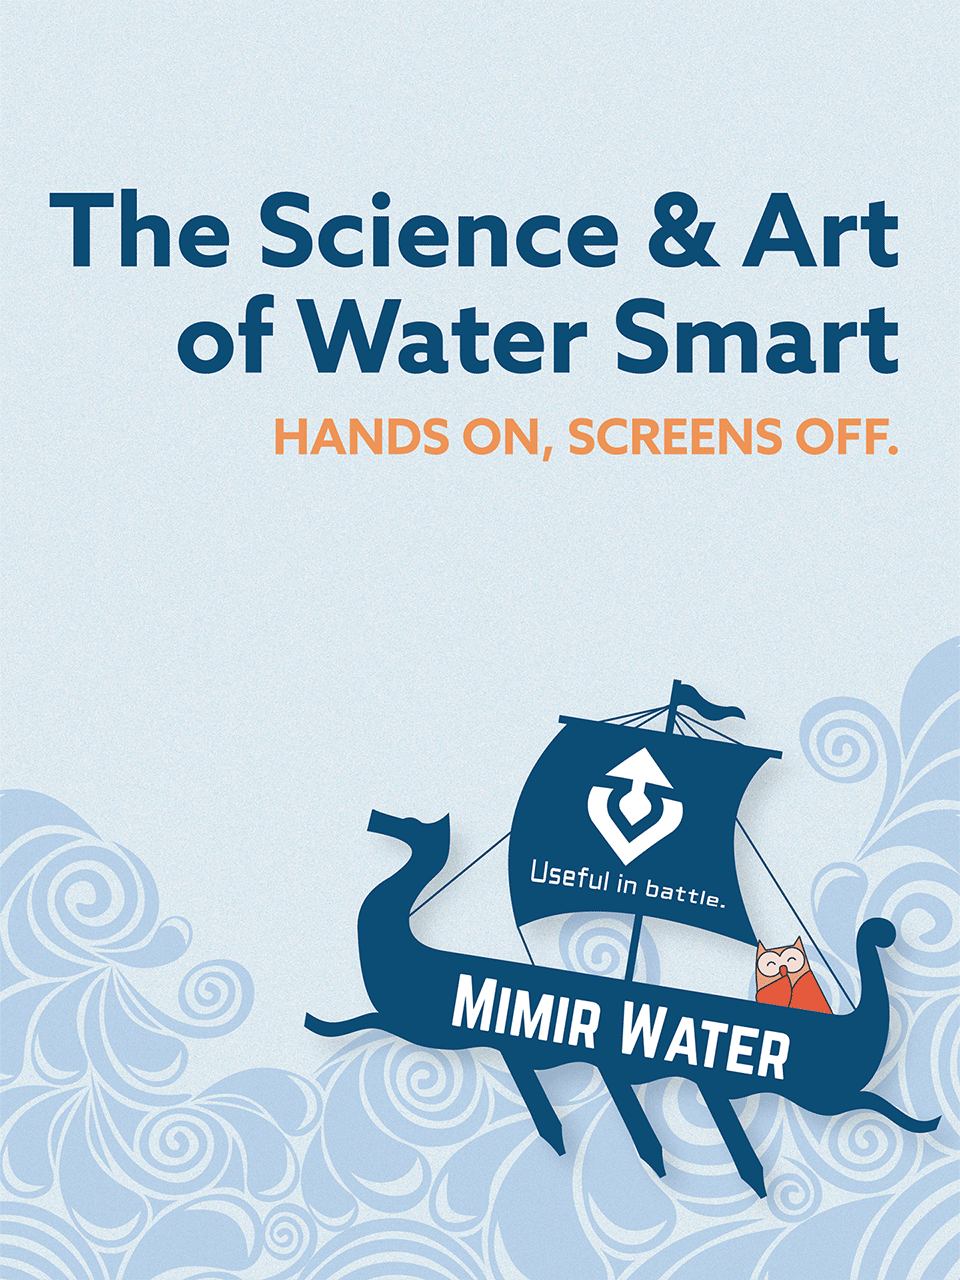 The Science & Art of Water Smart